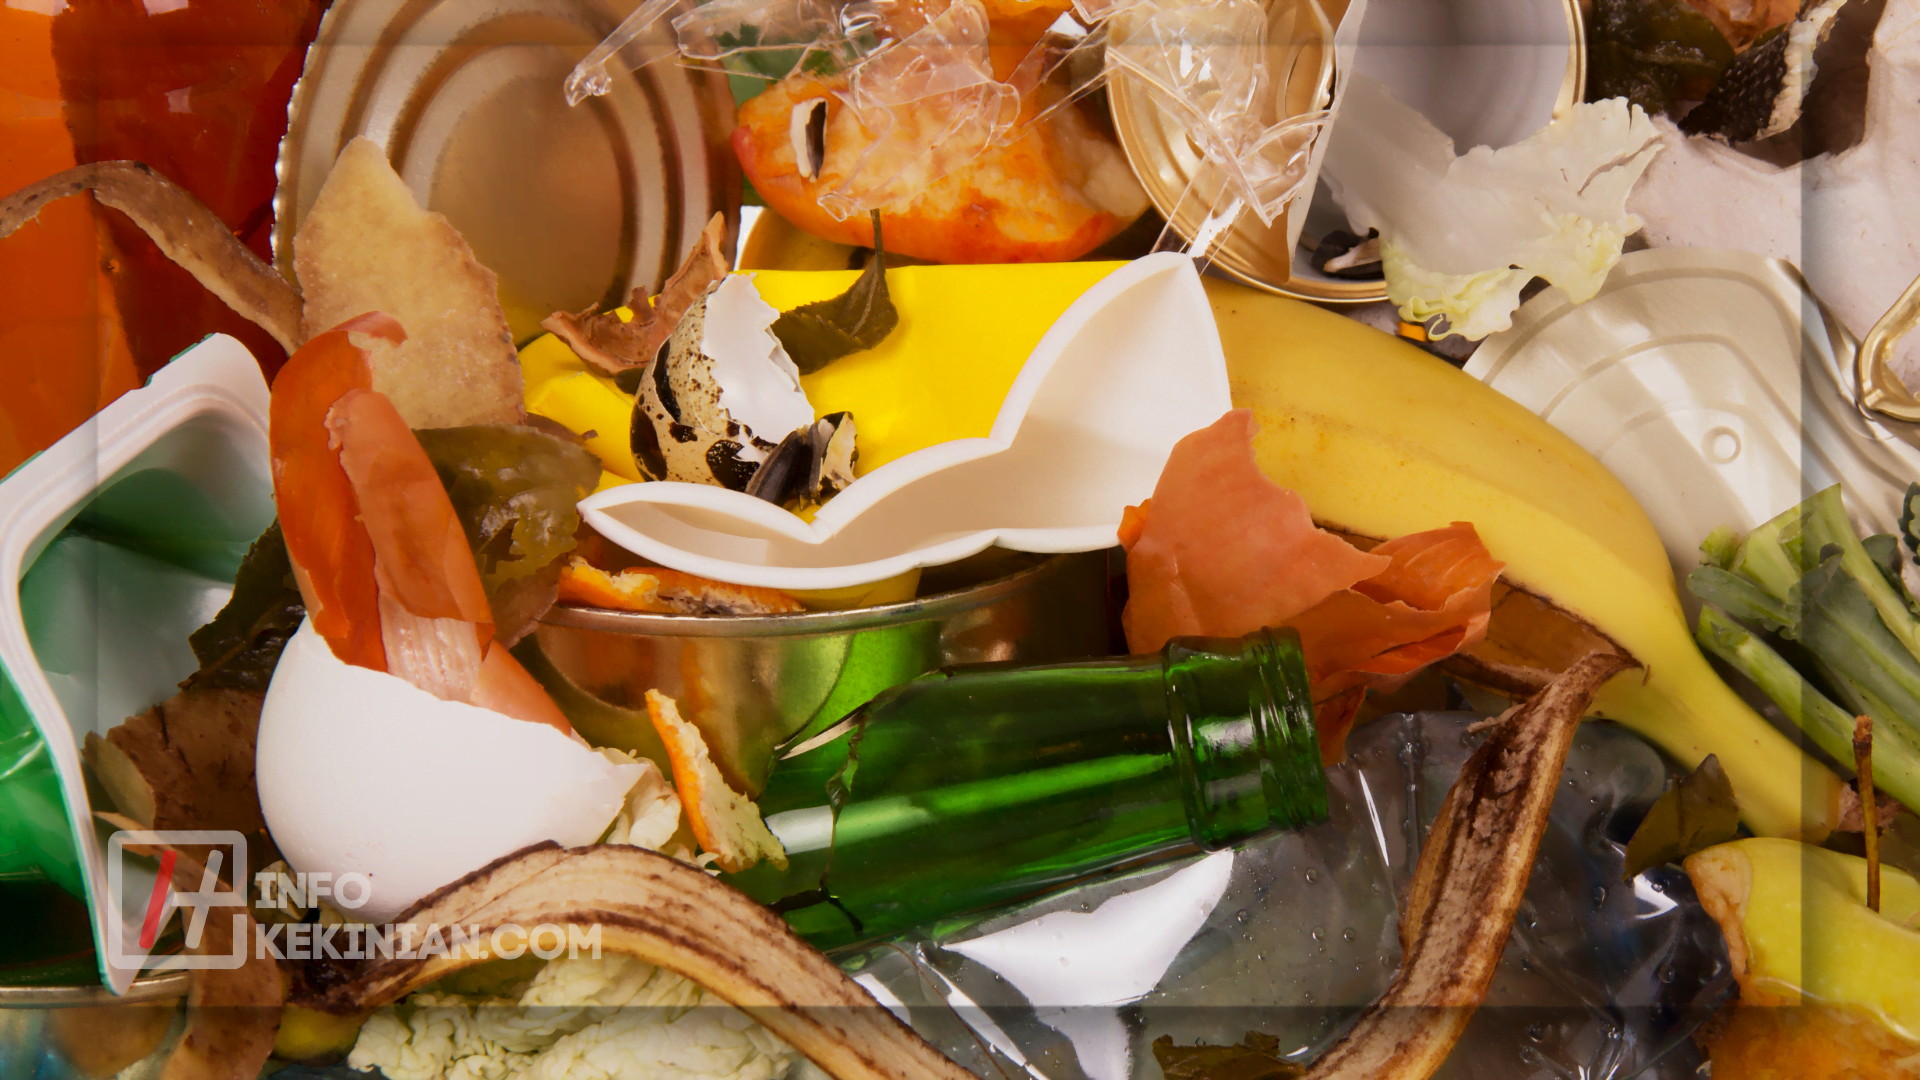 What is household waste?